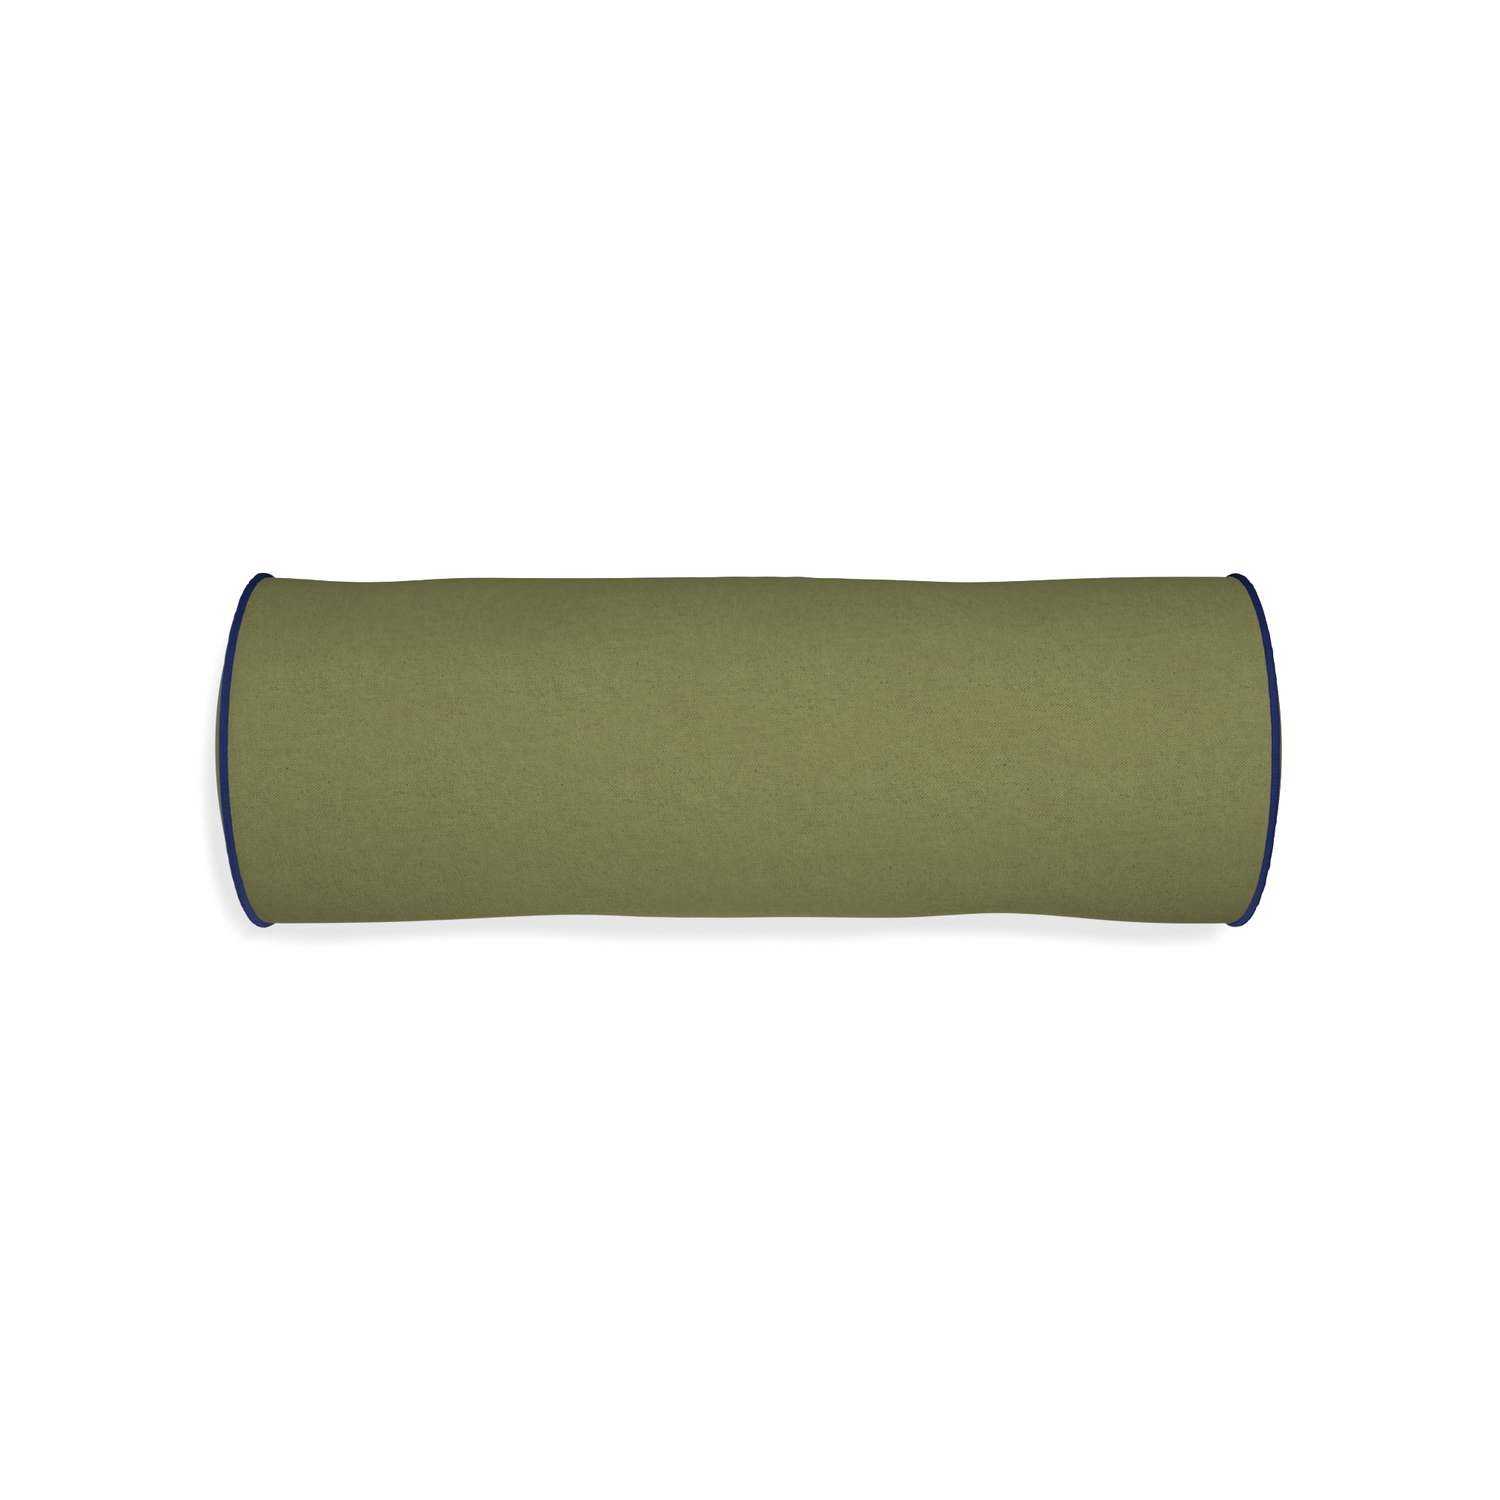 Bolster moss custom moss greenpillow with midnight piping on white background